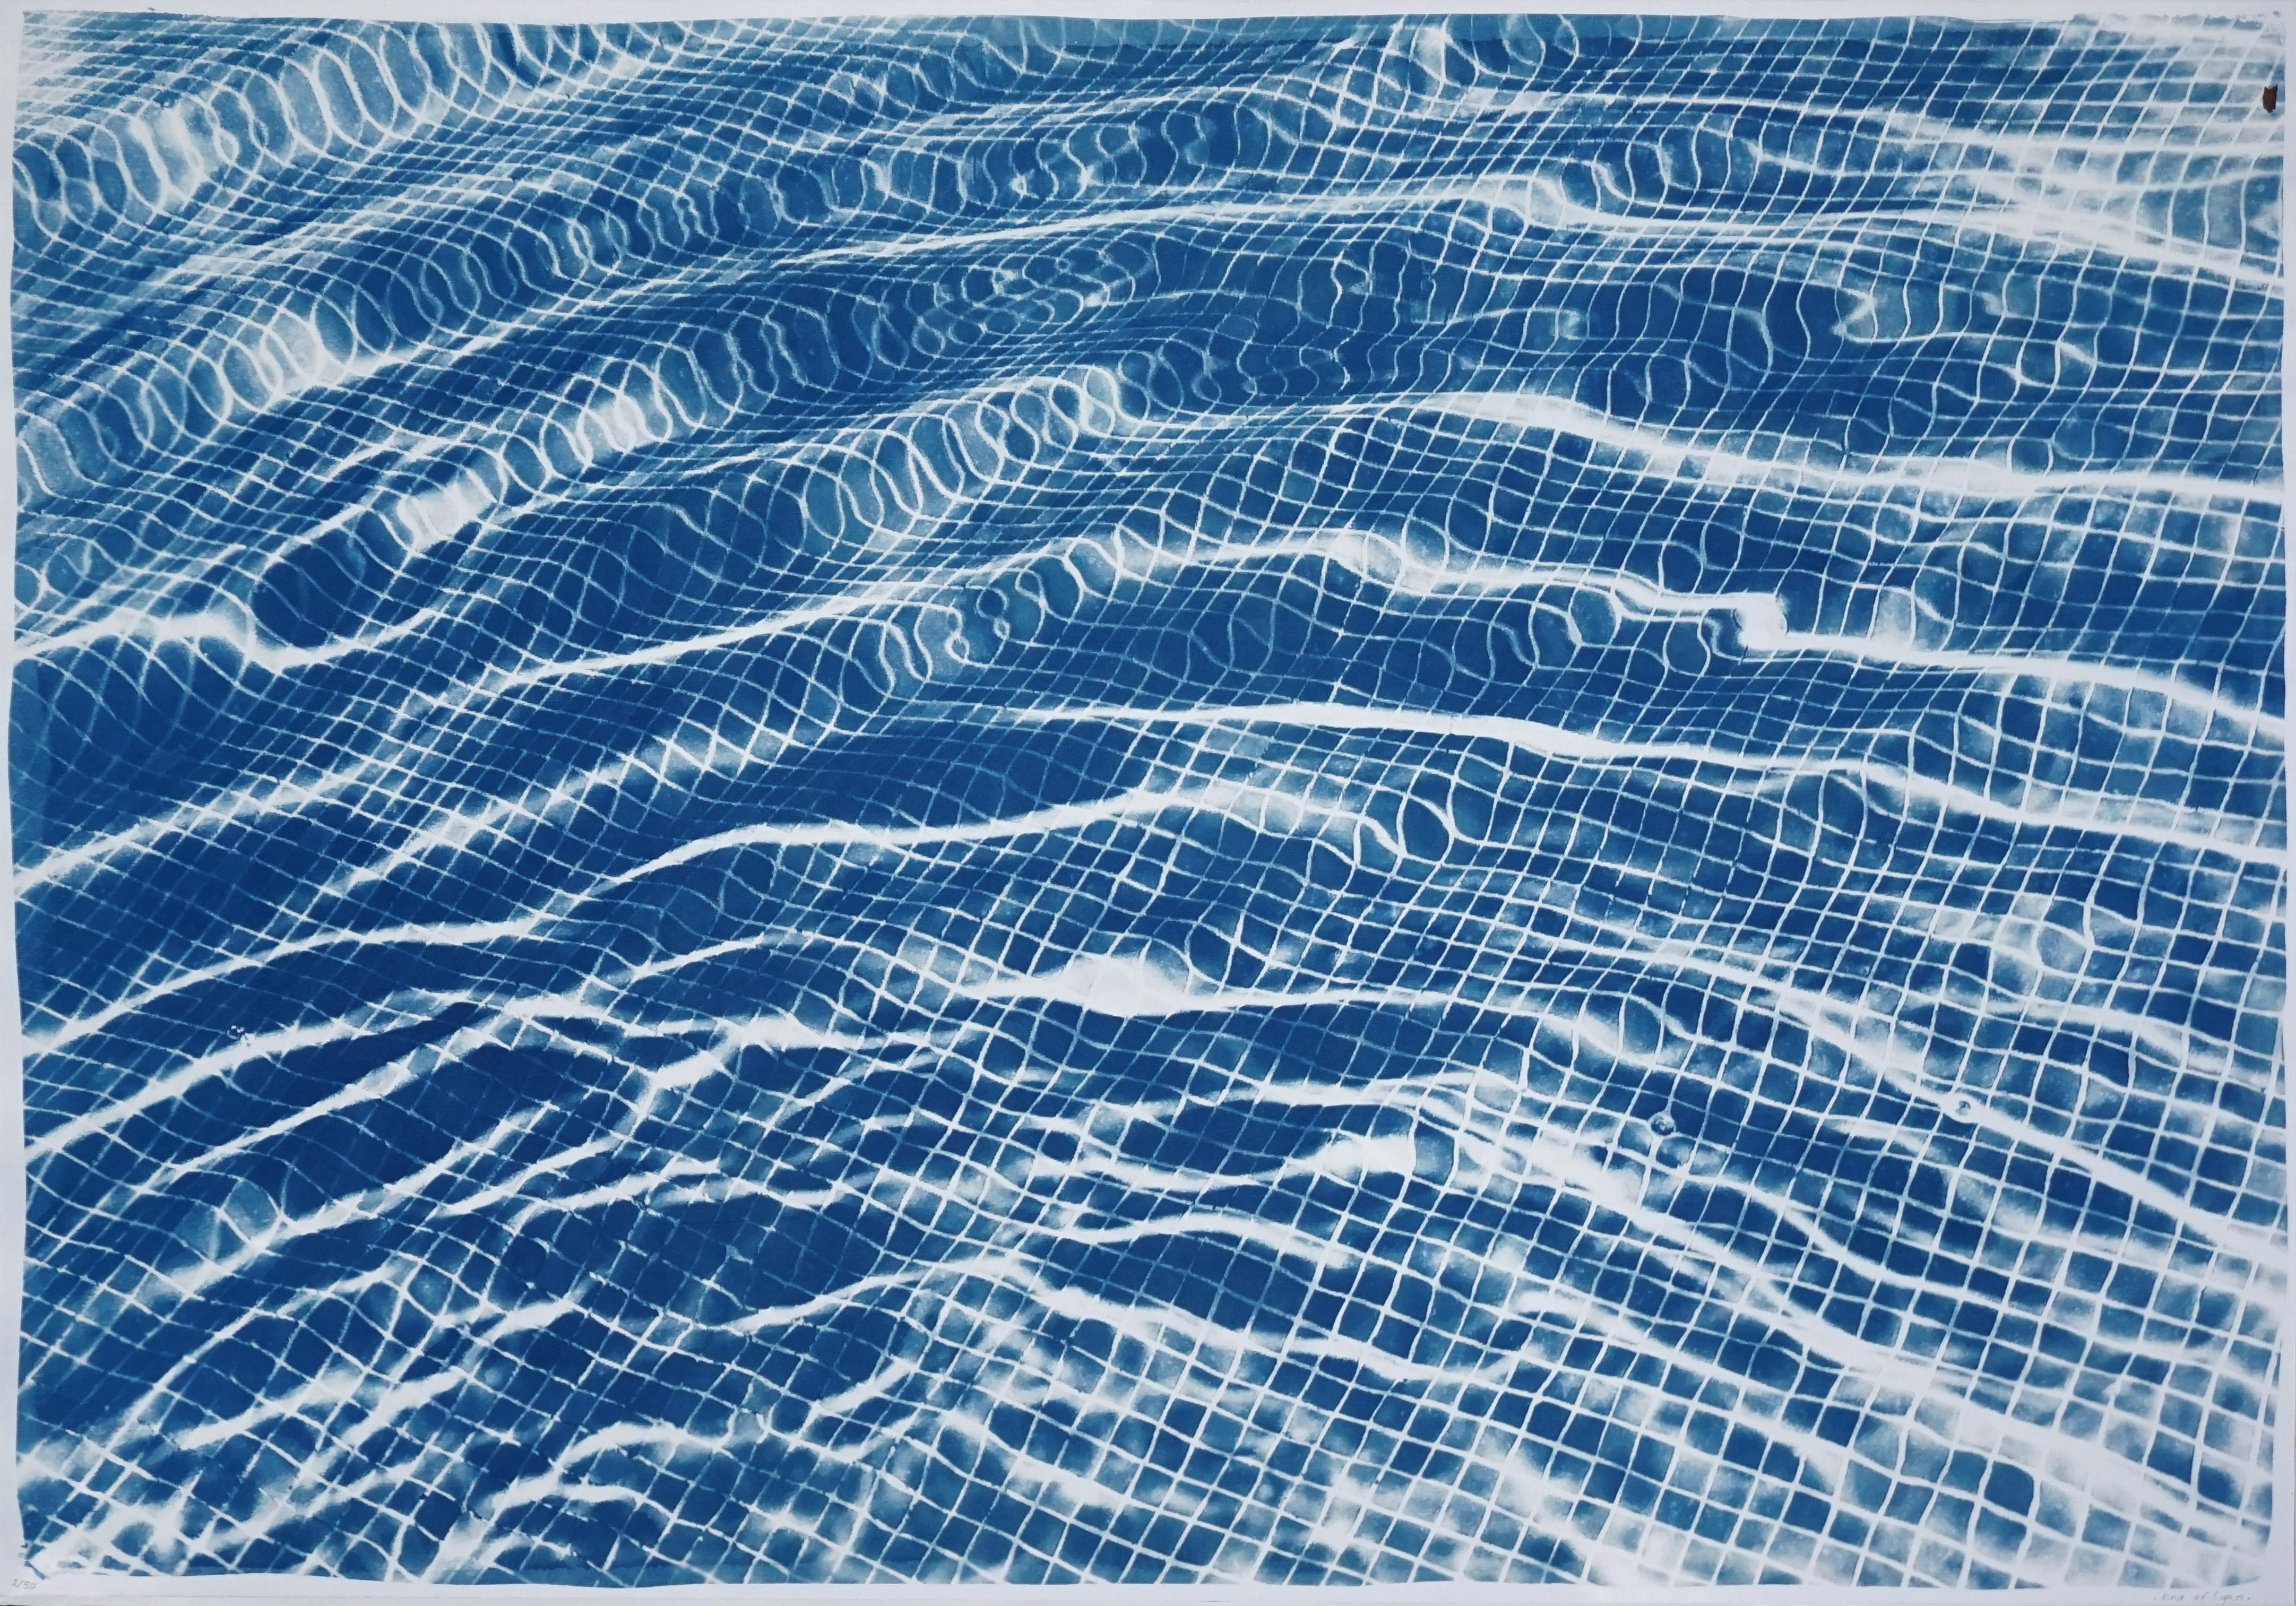 Miami Art Deco Pool, Blue Cyanotype on Paper, Abstract Shapes Water Reflections 